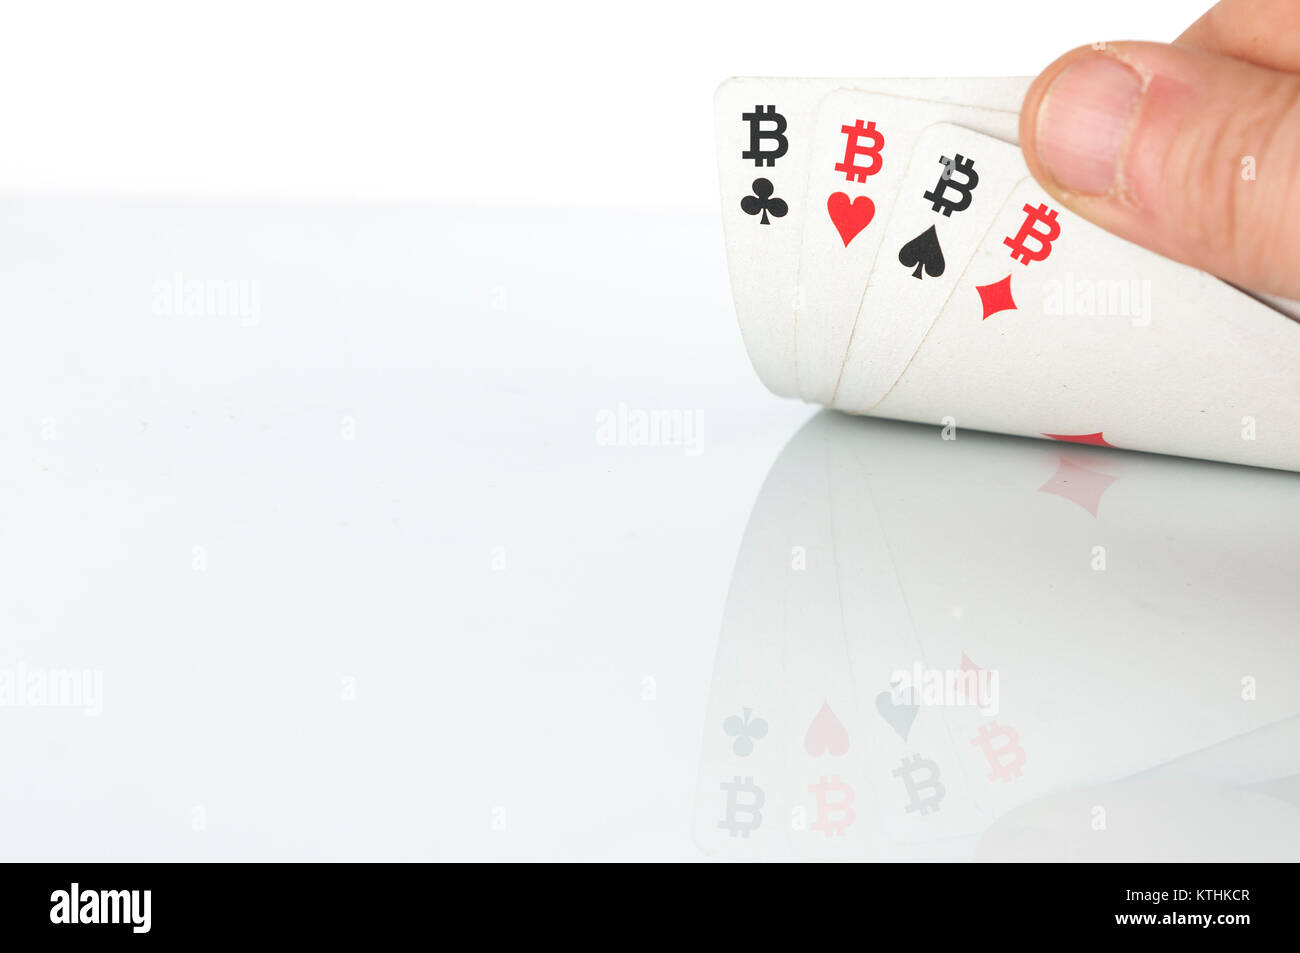 Bitcoin concept: four of a kind of bitcoin playing cards Stock Photo